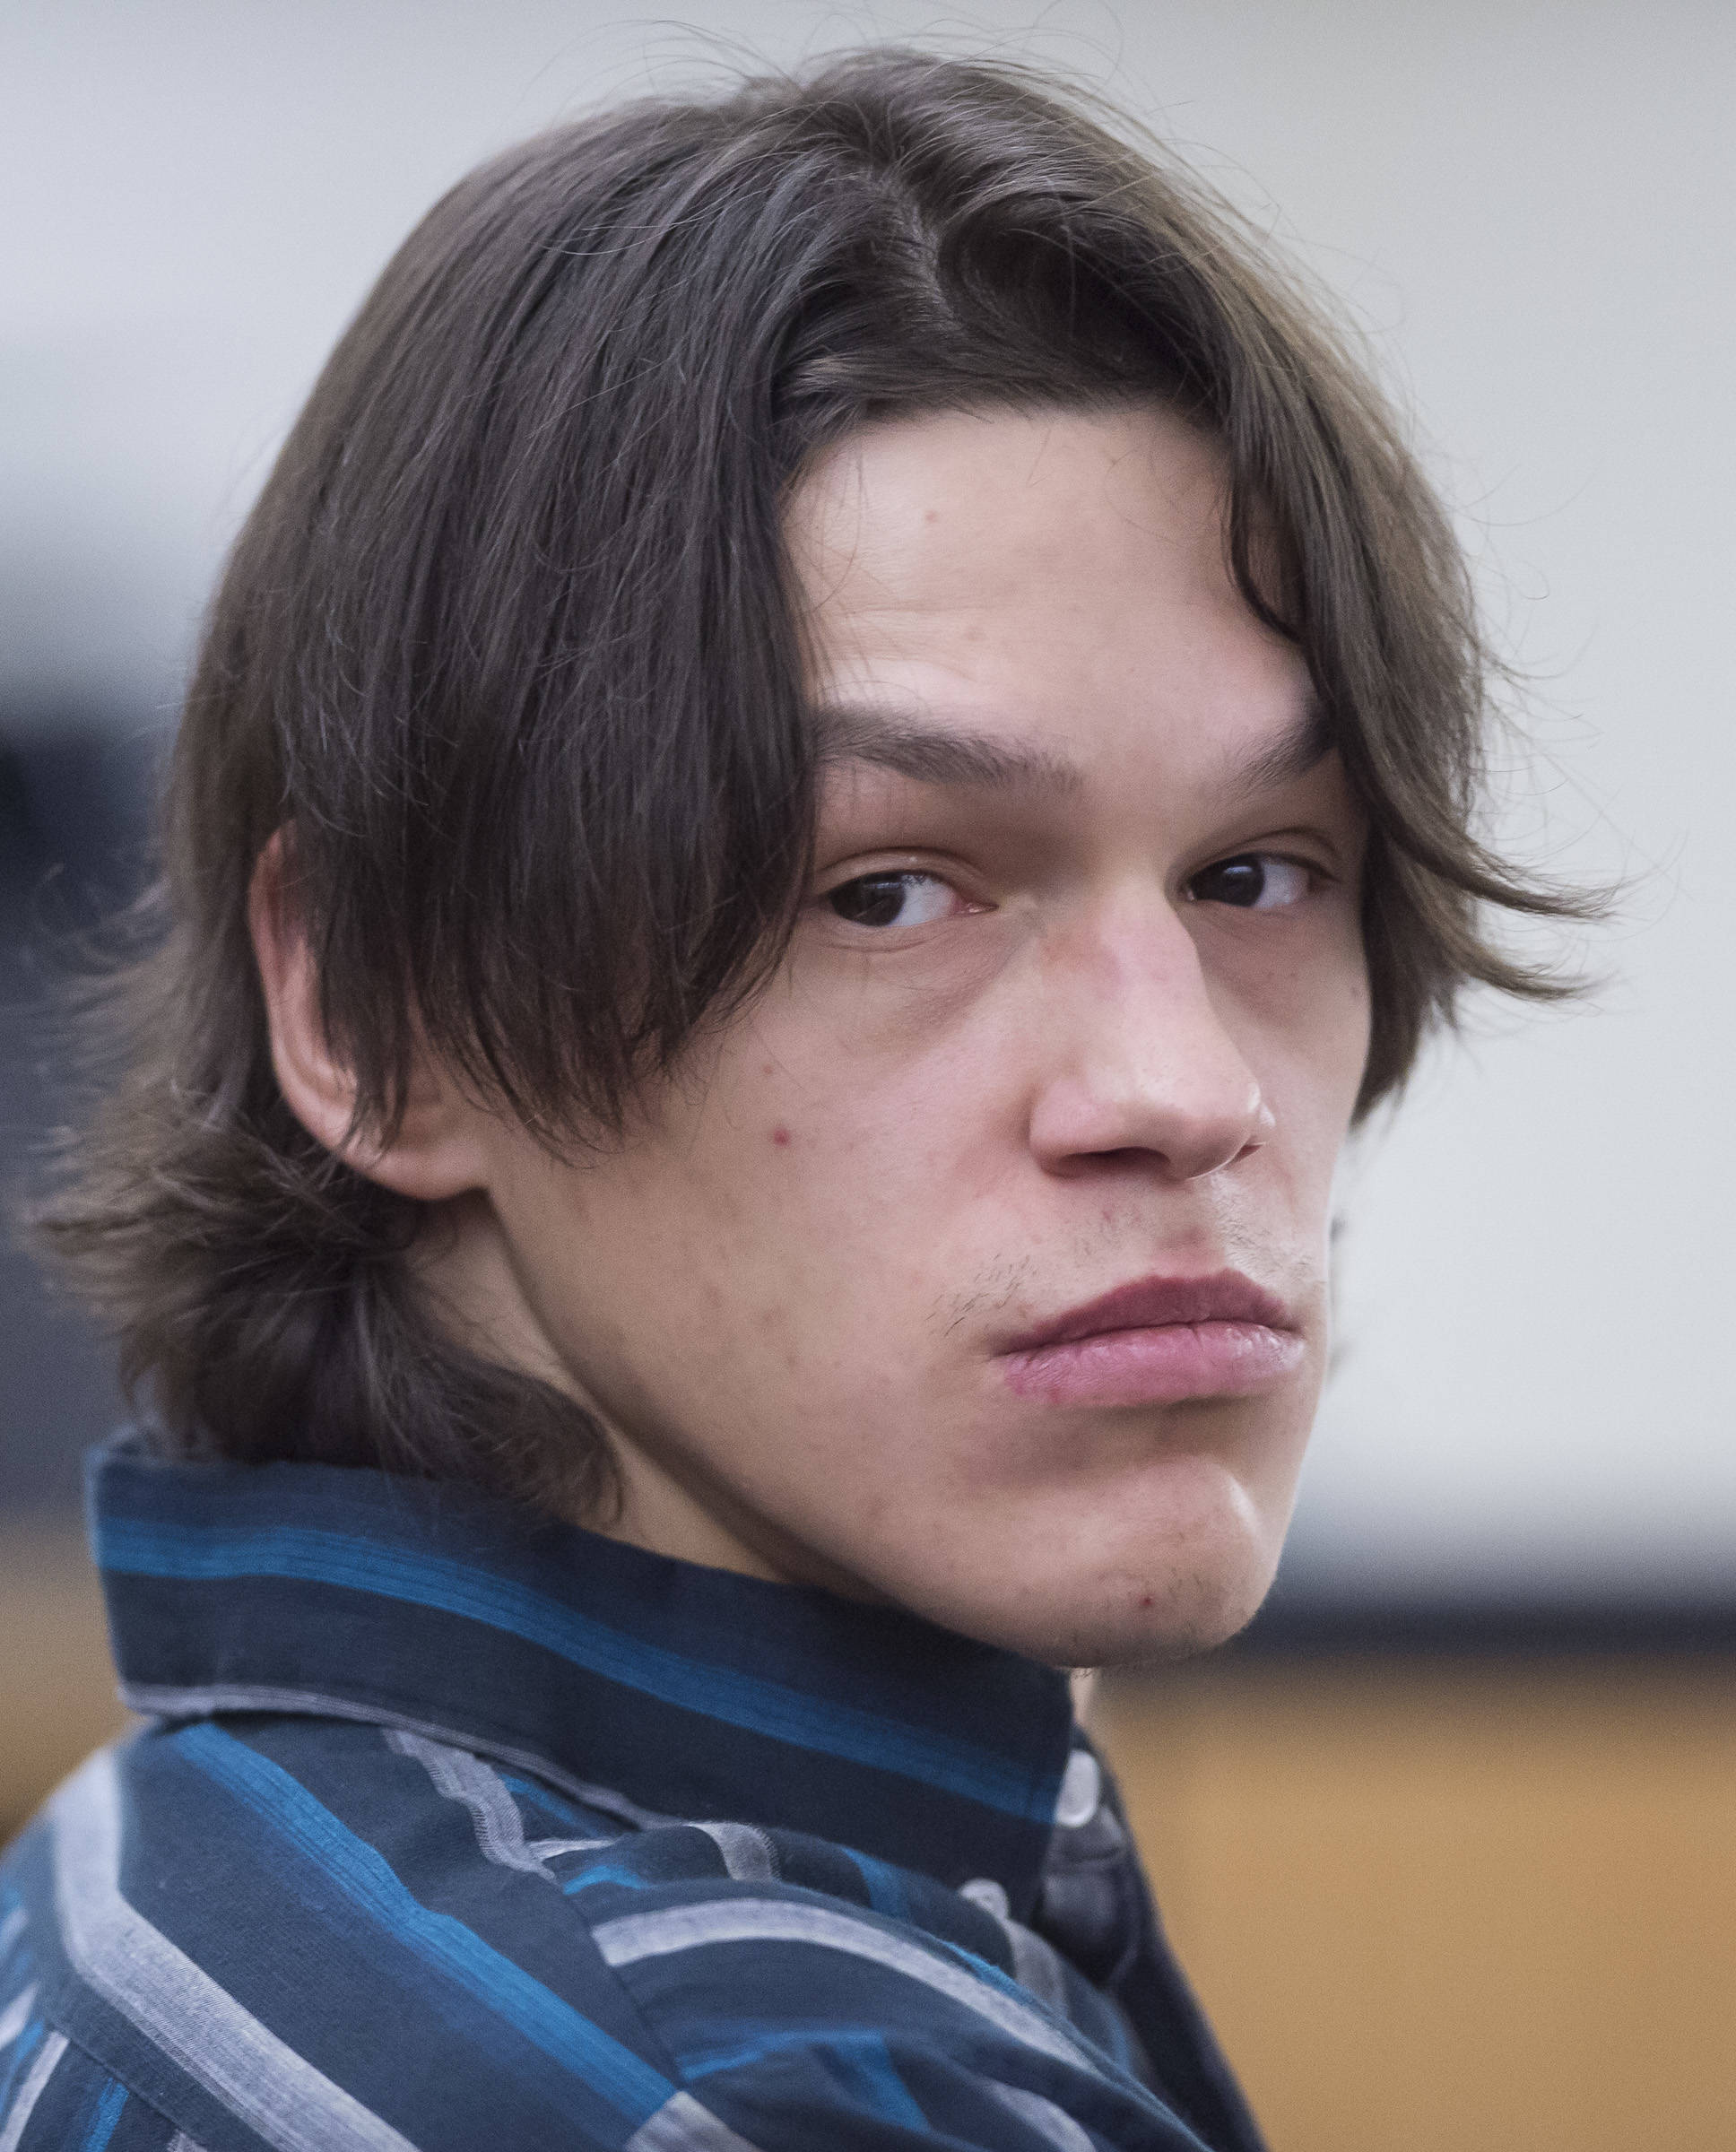 Domanic Quick, 23, appears in Juneau District Court on Tuesday, Dec. 18, 2018, for his trial on two counts of assault on a police officer, resisting arrest, disorderly conduct and criminal mischief. (Michael Penn | Juneau Empire)